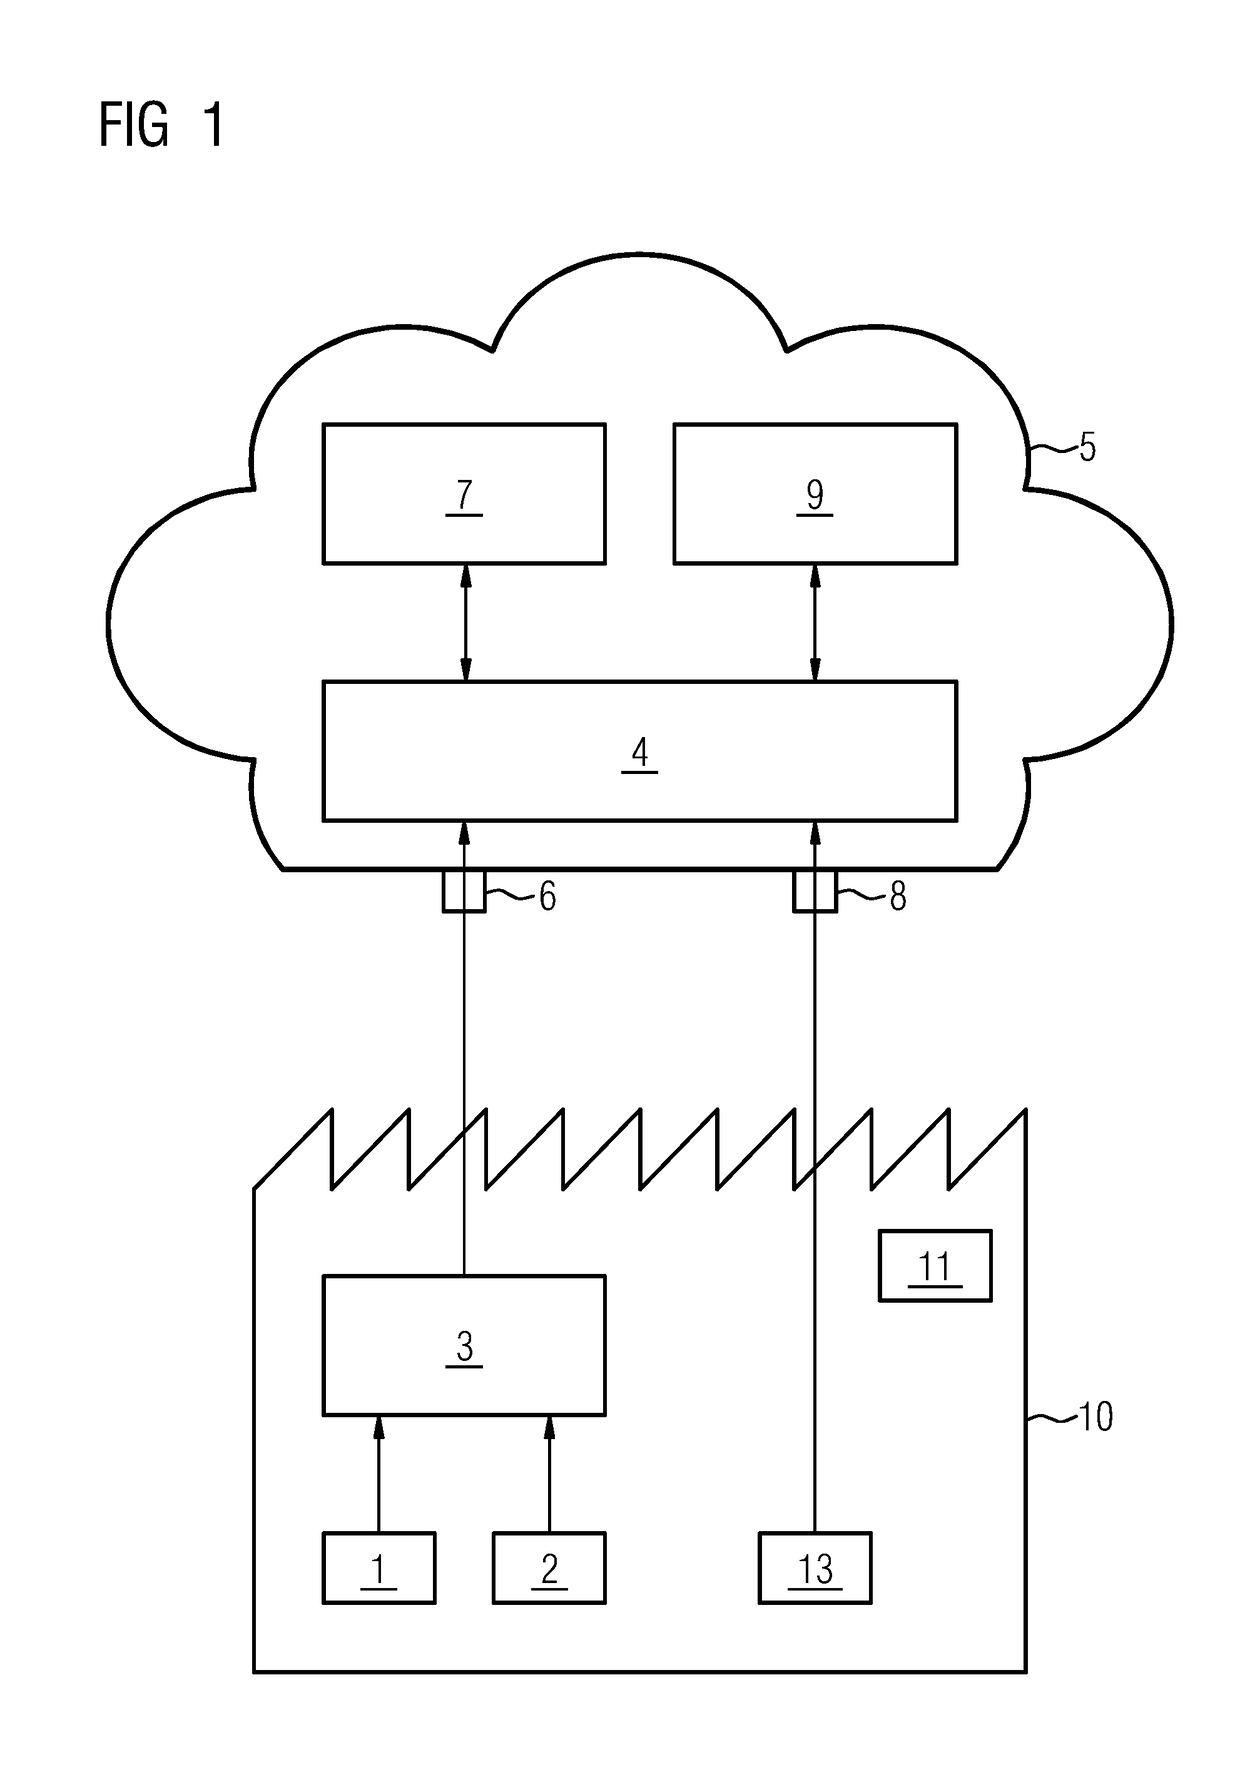 System and method configured to execute data model transformations on data for cloud based applications